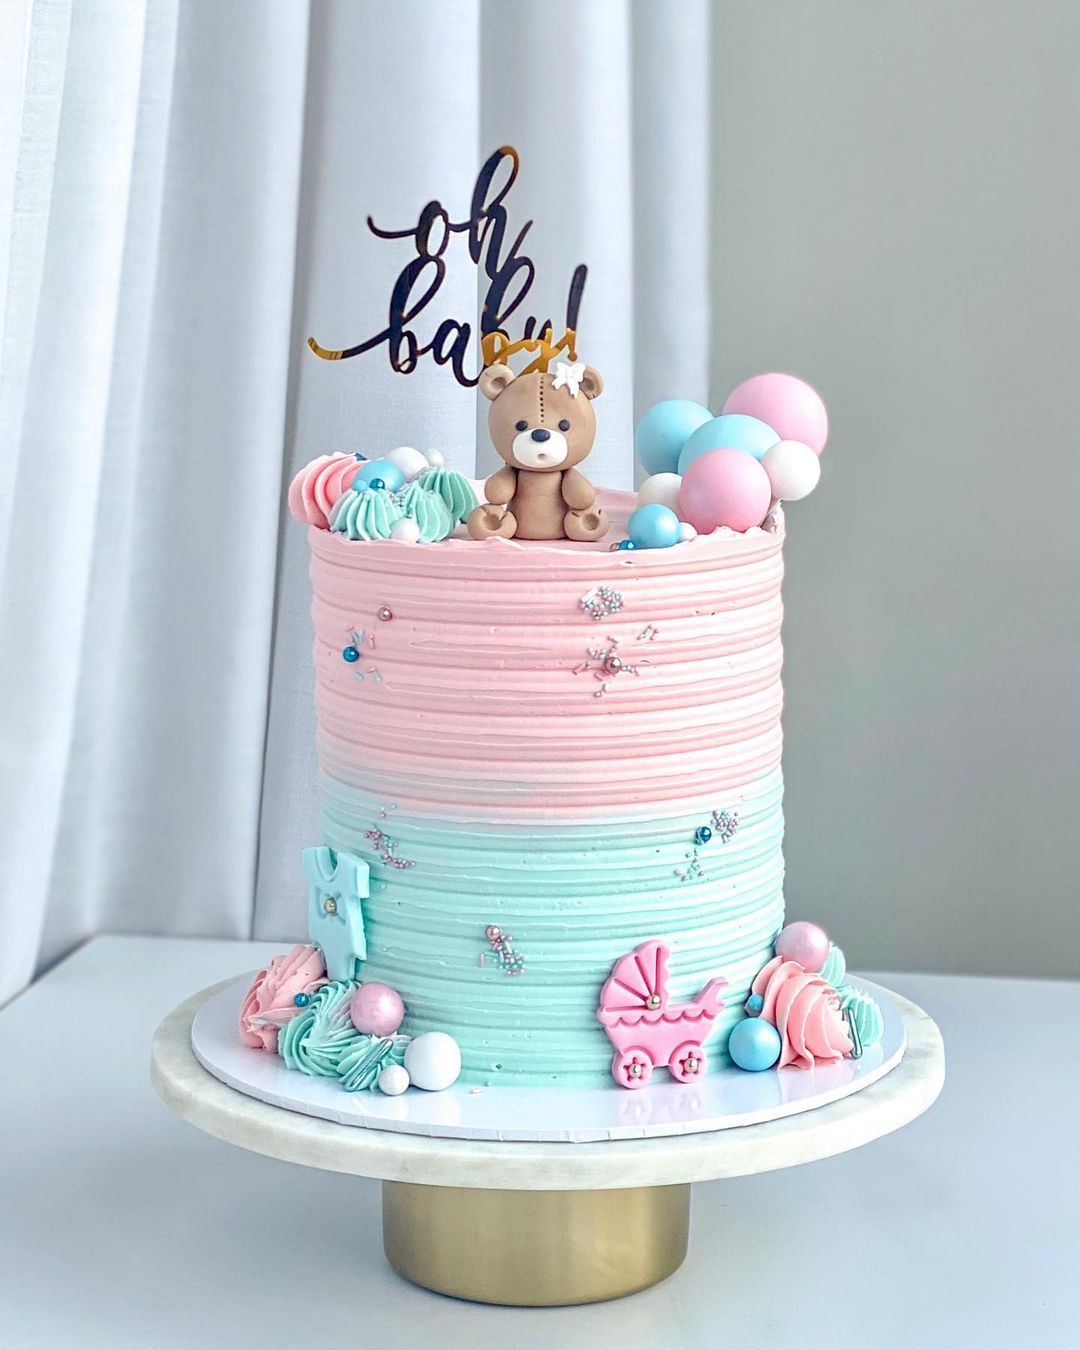 Creative and Adorable Baby Shower Cake Designs